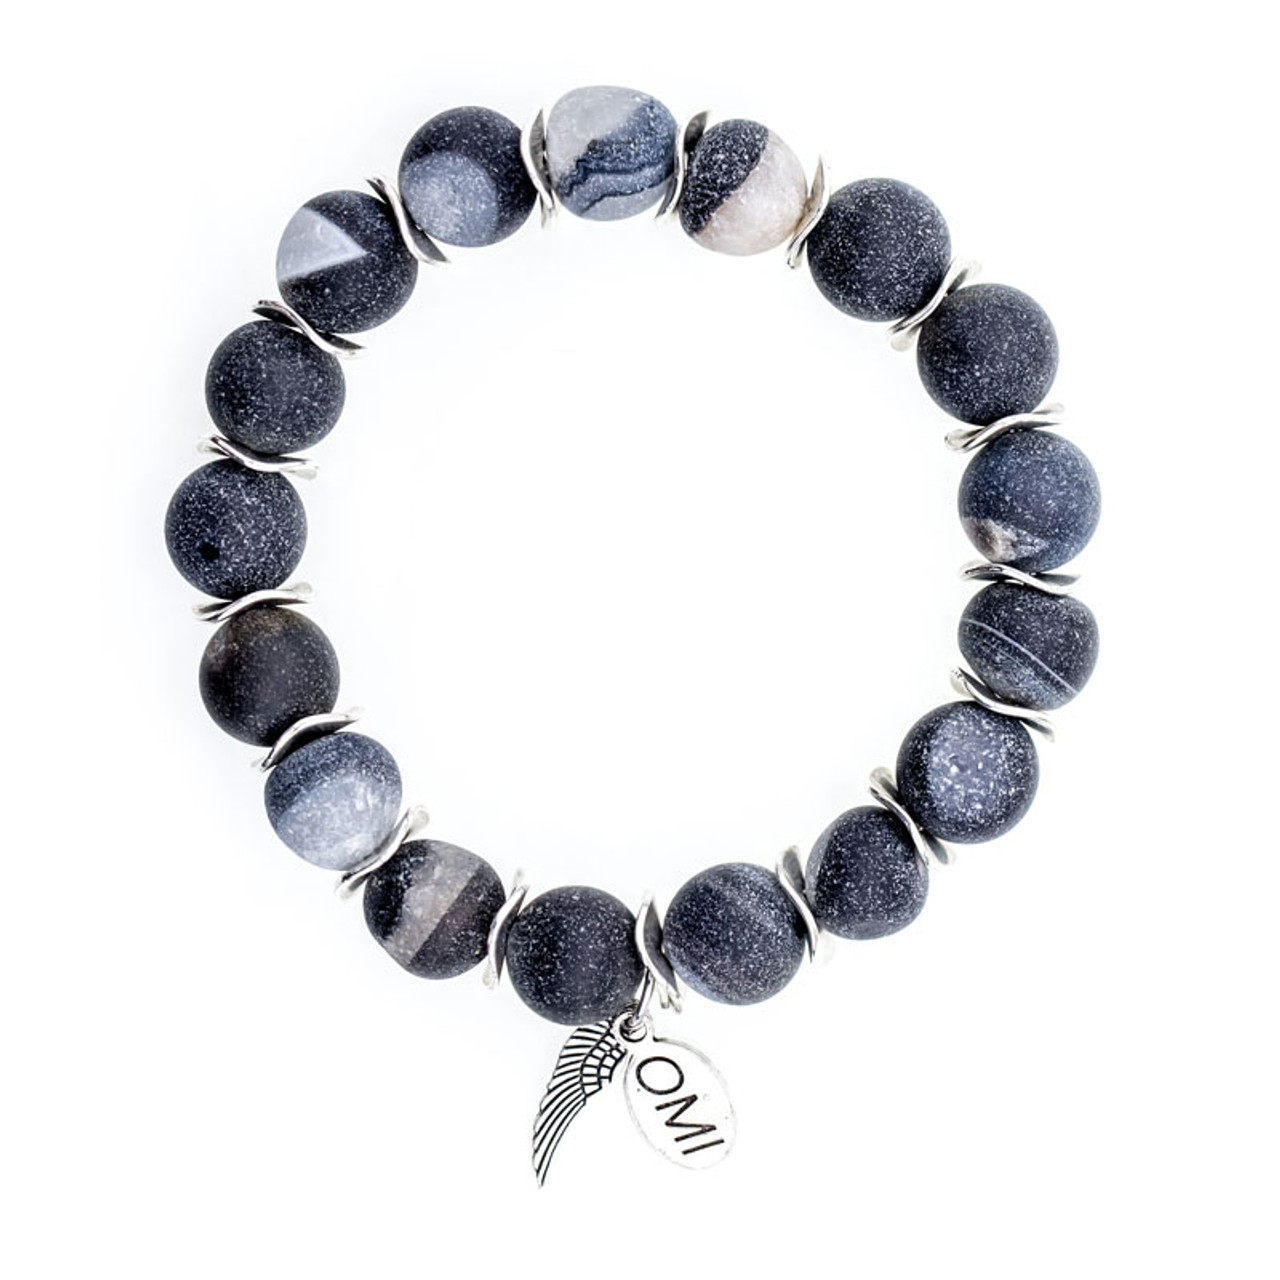 Grey Matte Druzy Stone Bead Bracelet with Silver Spacers - 10mm-Wholesale